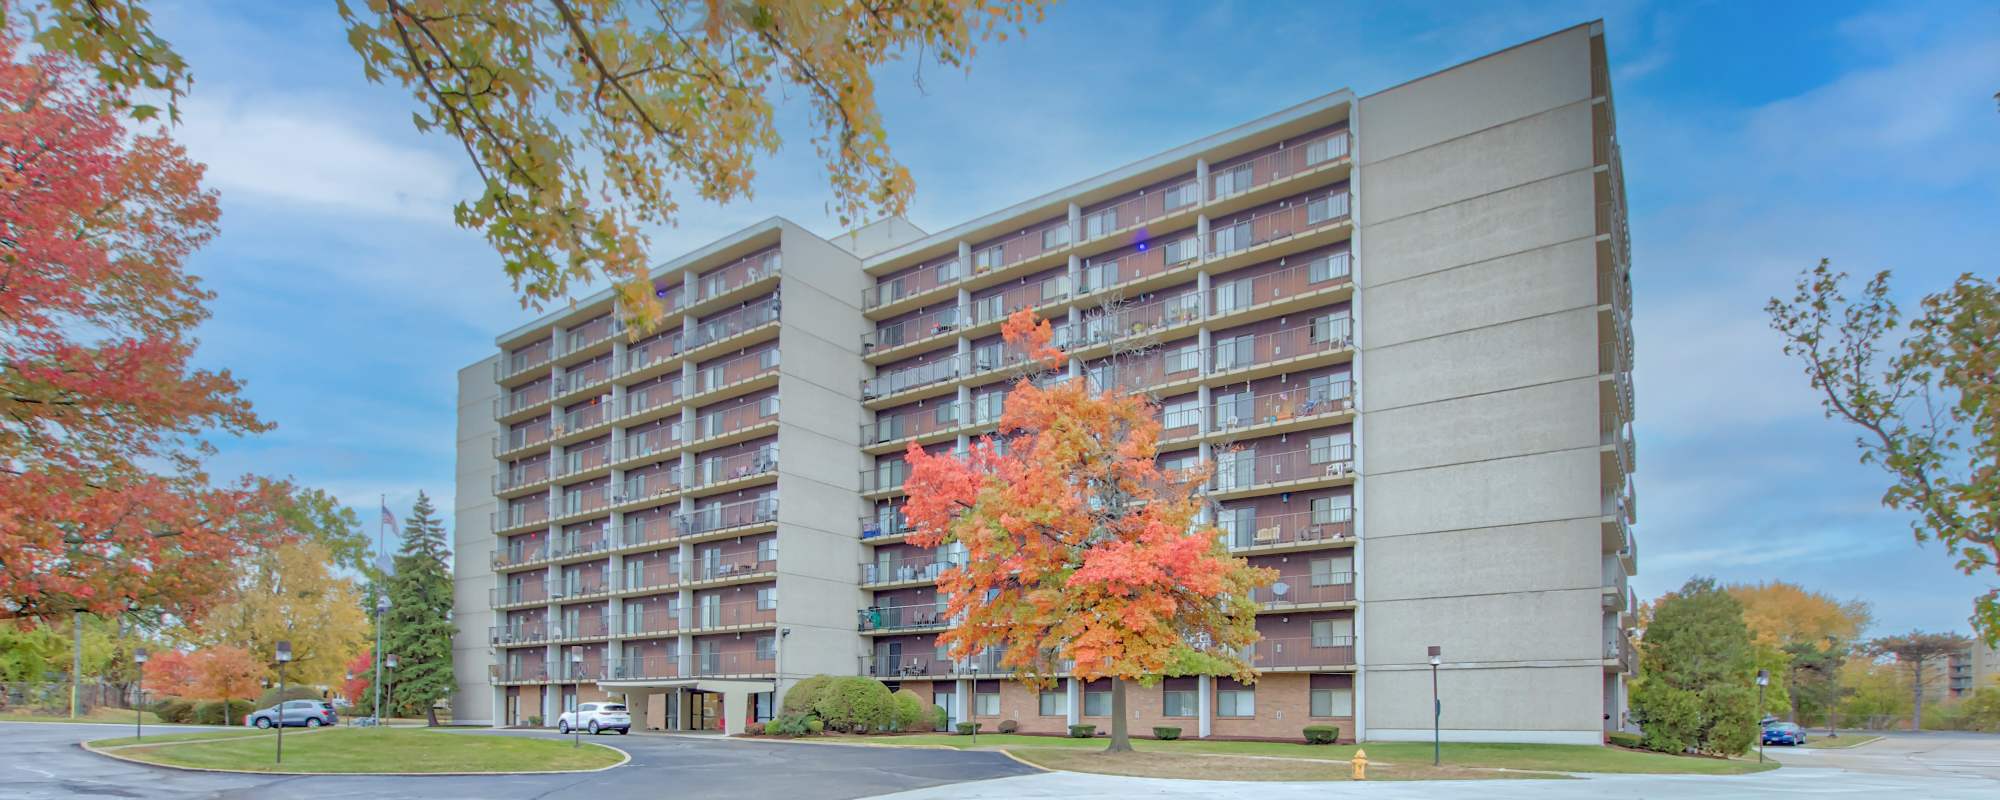 Apartments at Park Place Towers in Mount Clemens, Michigan